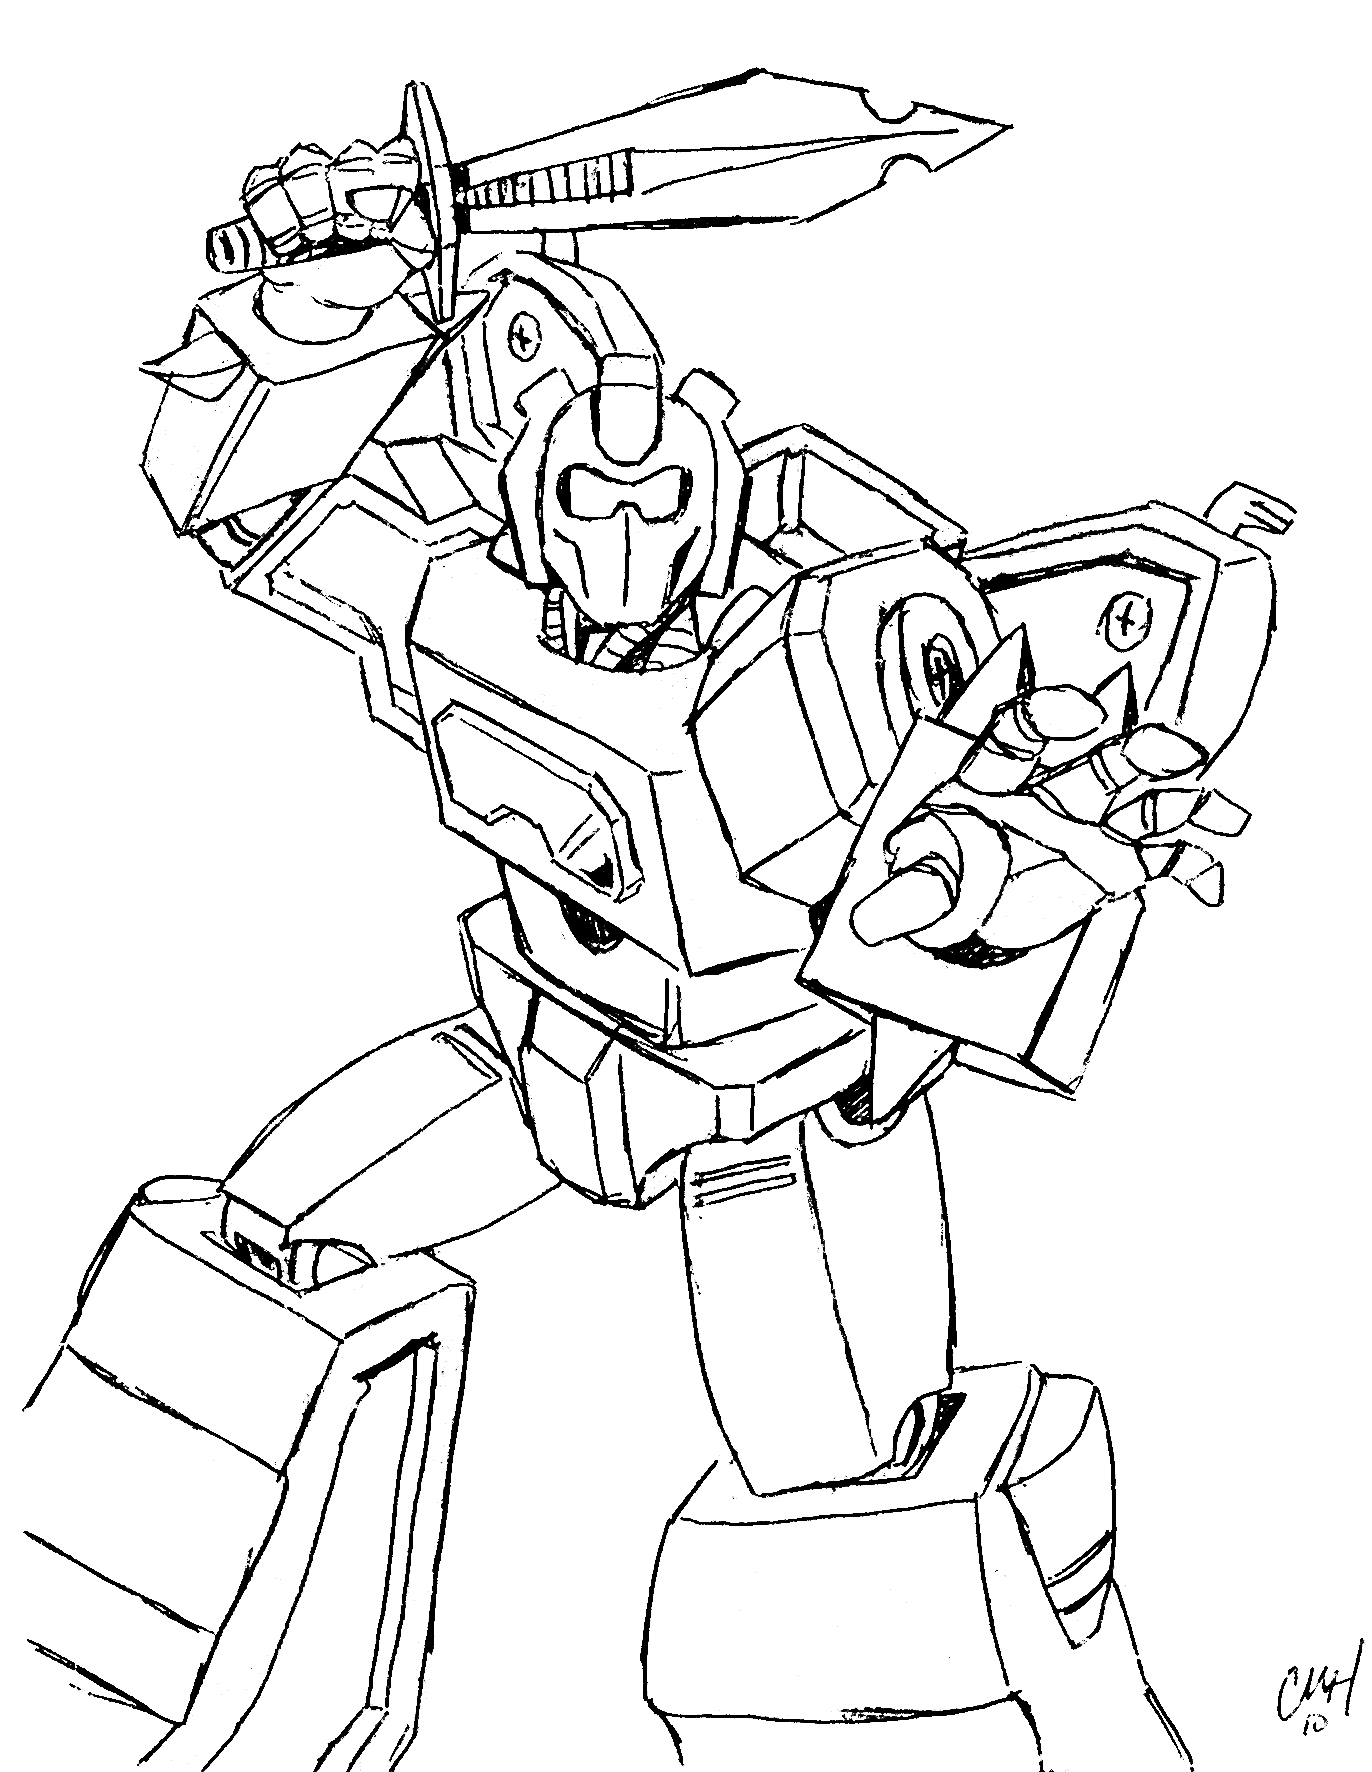 Free printable transformers coloring pages for kids transformers coloring pages coloring pages to print coloring books